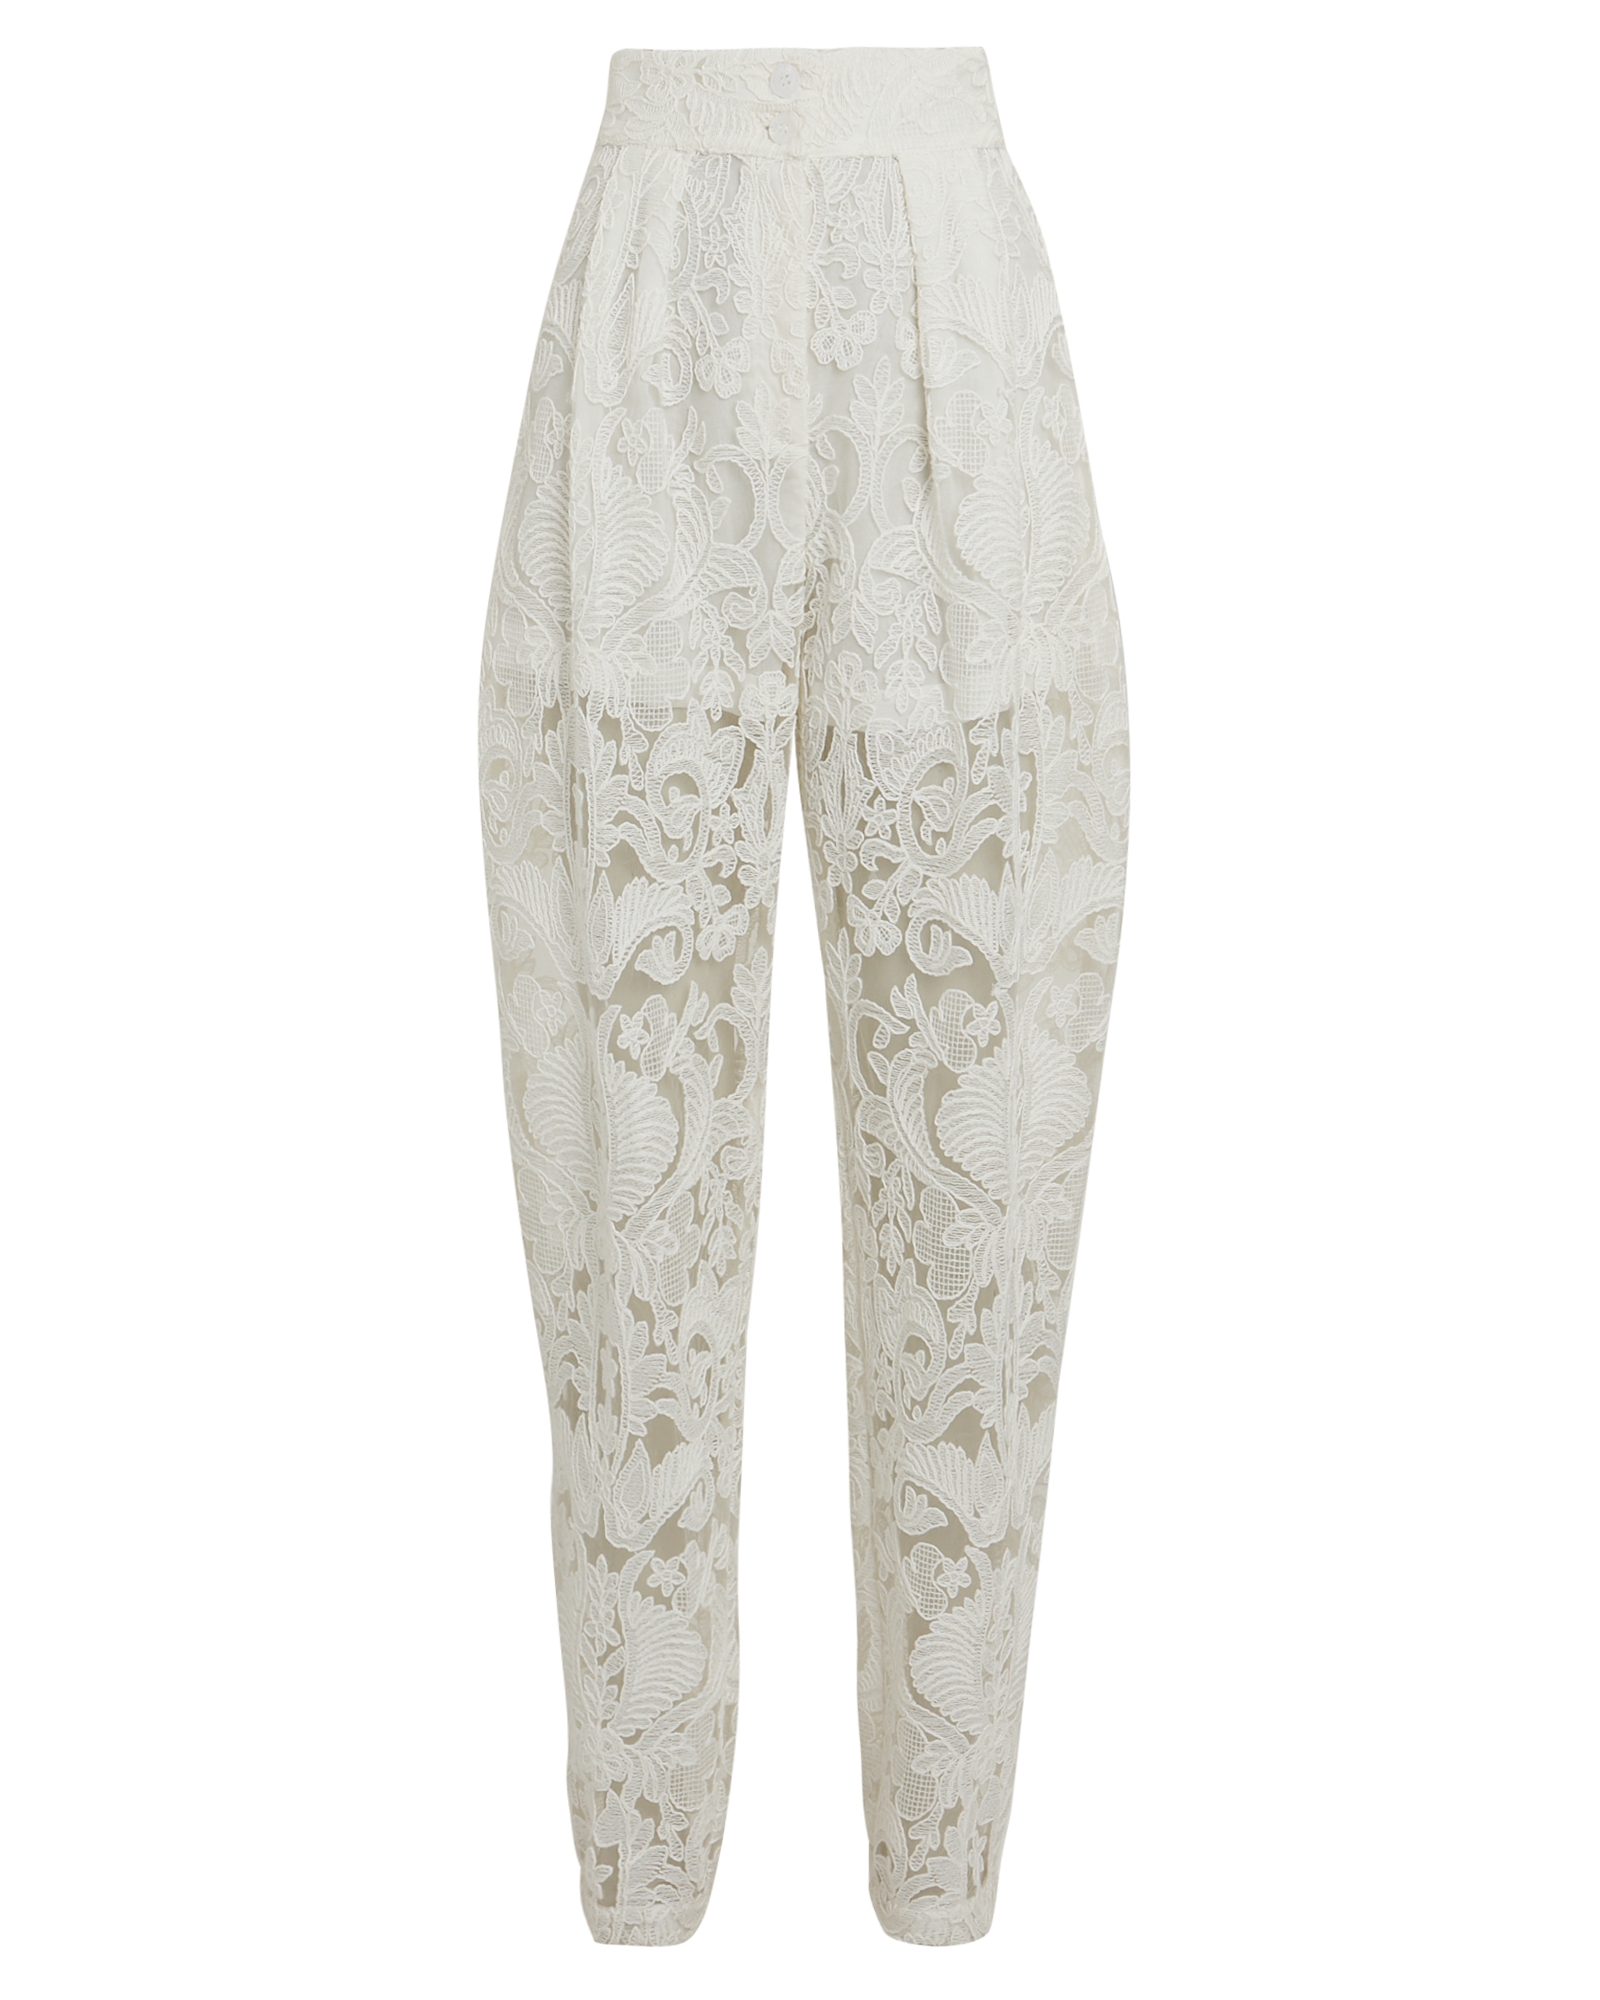 Sabina Musayev Luther Tapered Lace Pants | INTERMIX®